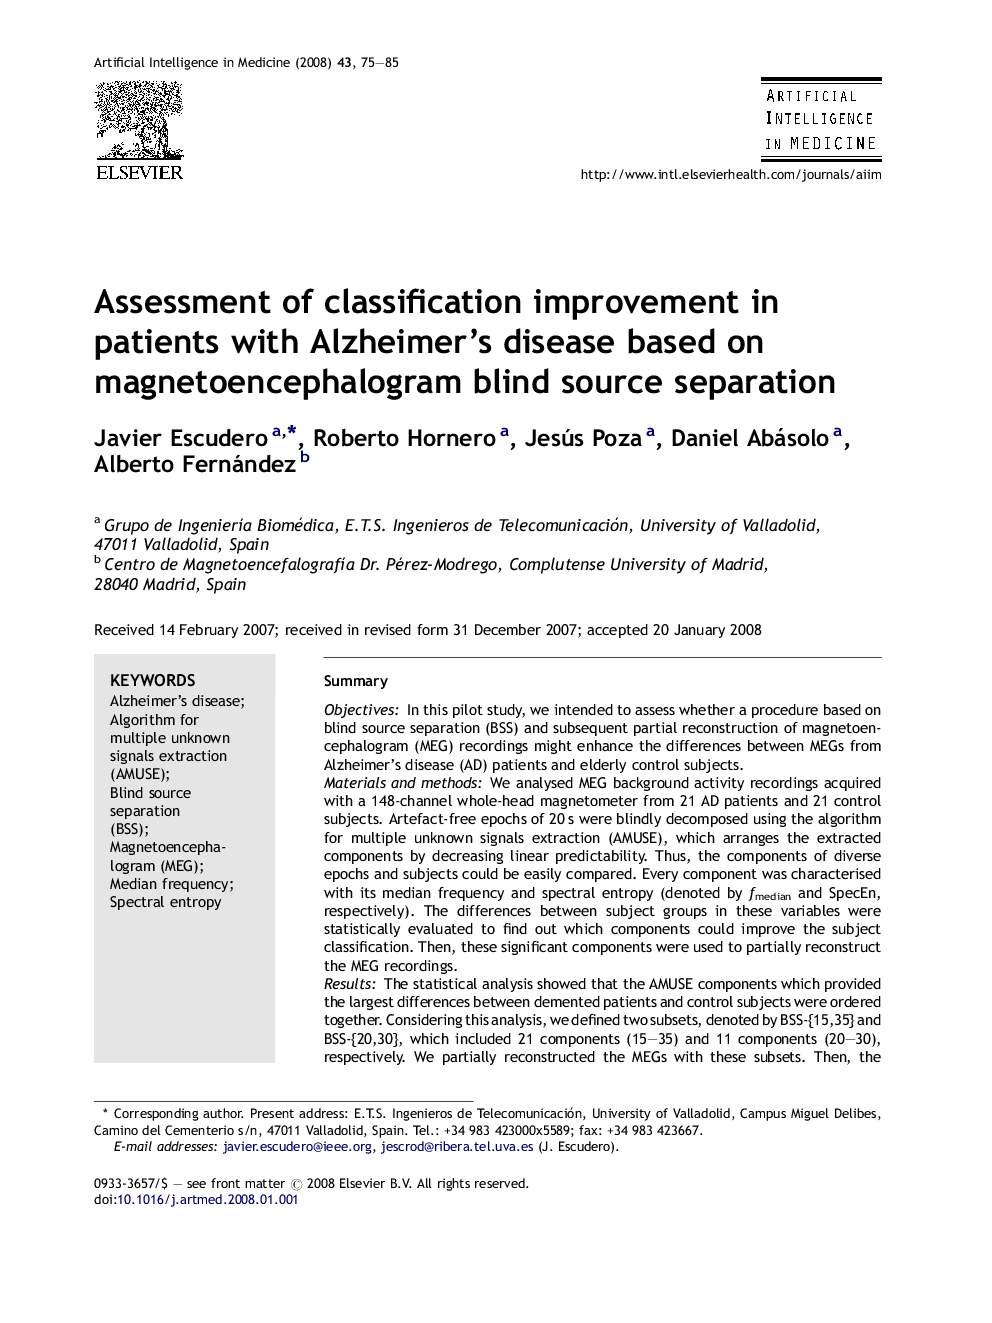 Assessment of classification improvement in patients with Alzheimer's disease based on magnetoencephalogram blind source separation